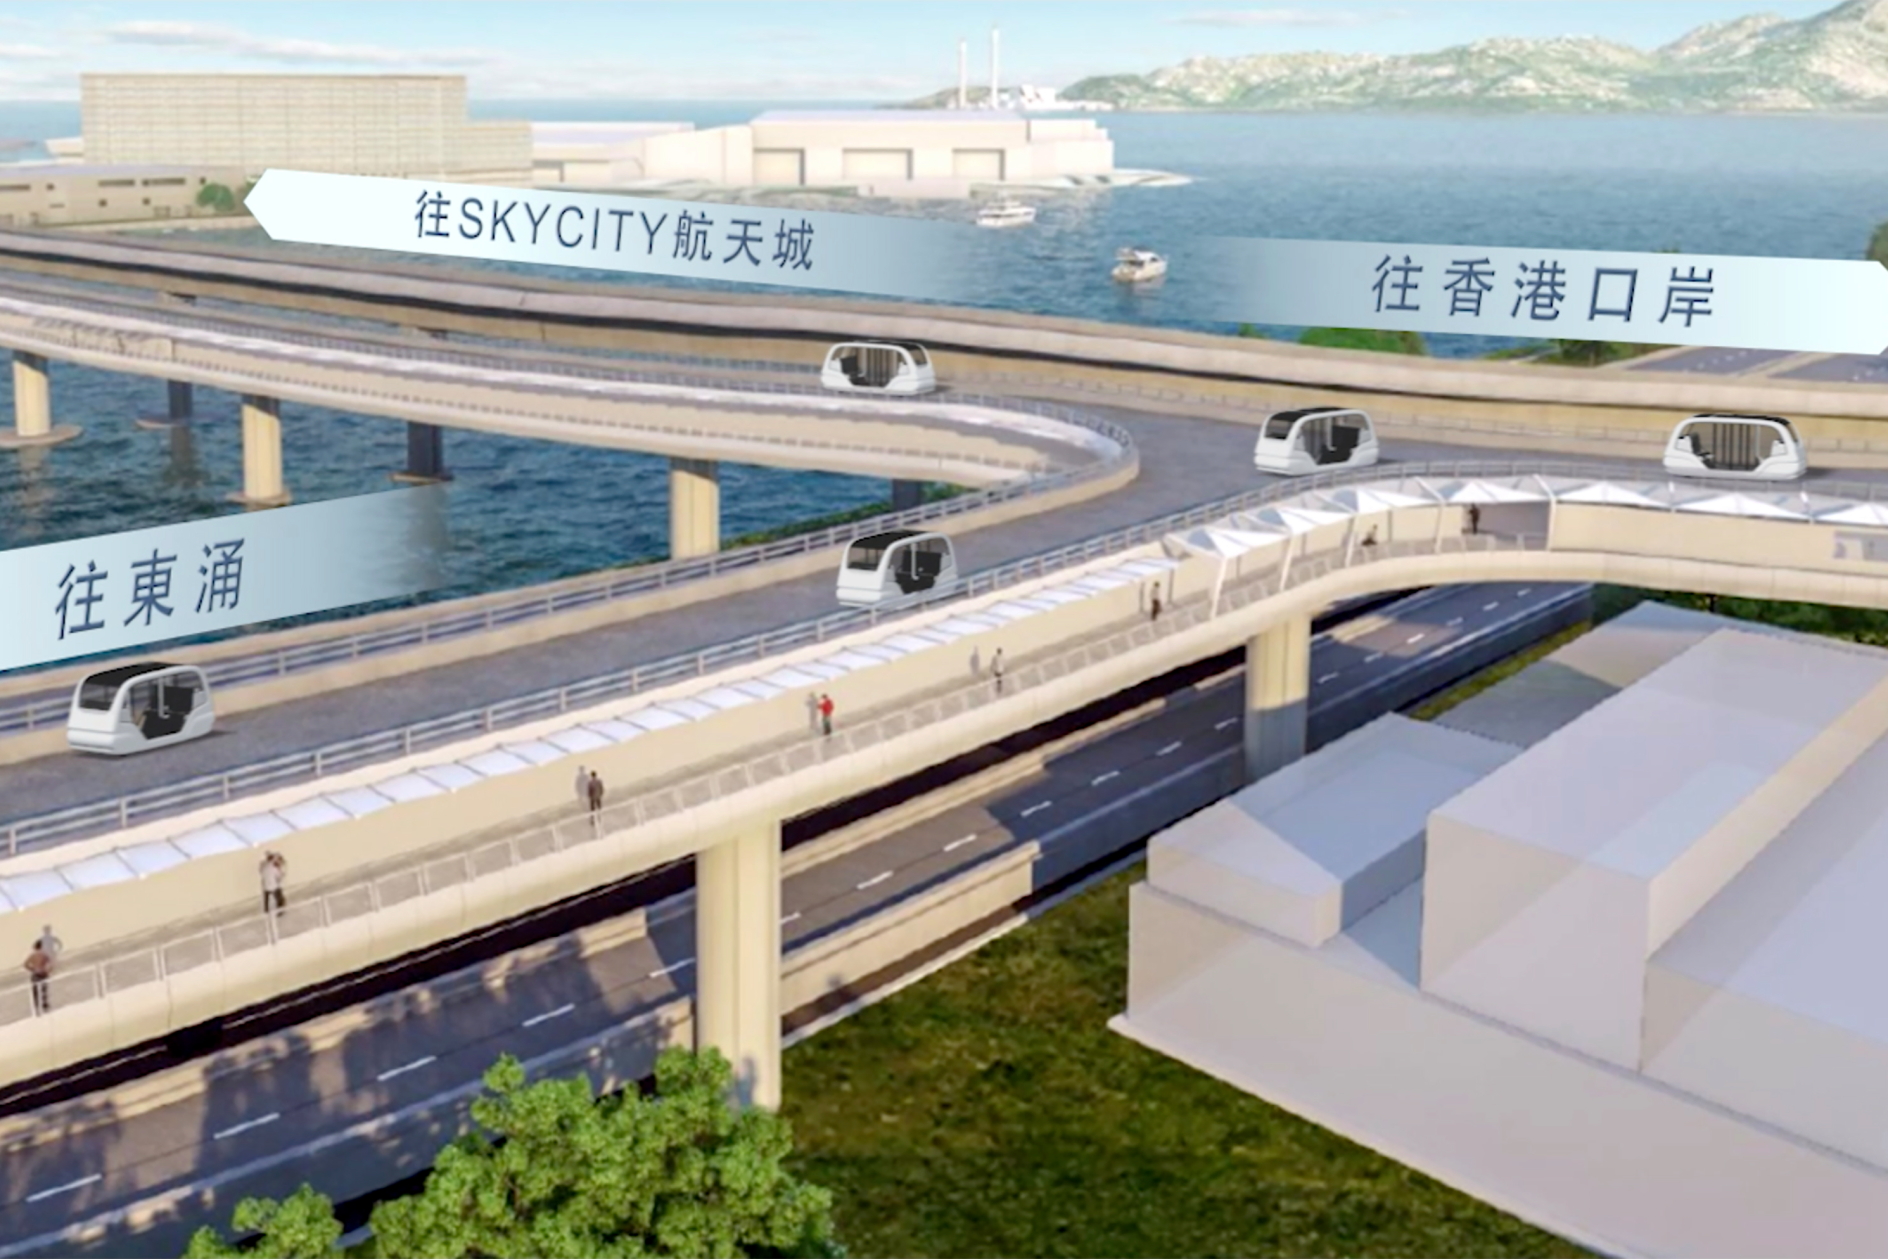 The Airport Authority plans to introduce an autonomous transportation system on the Airport City Link to connect HKBCF Island and SKYCITY, and extend the system to Tung Chung town centre. Click to enlarge.